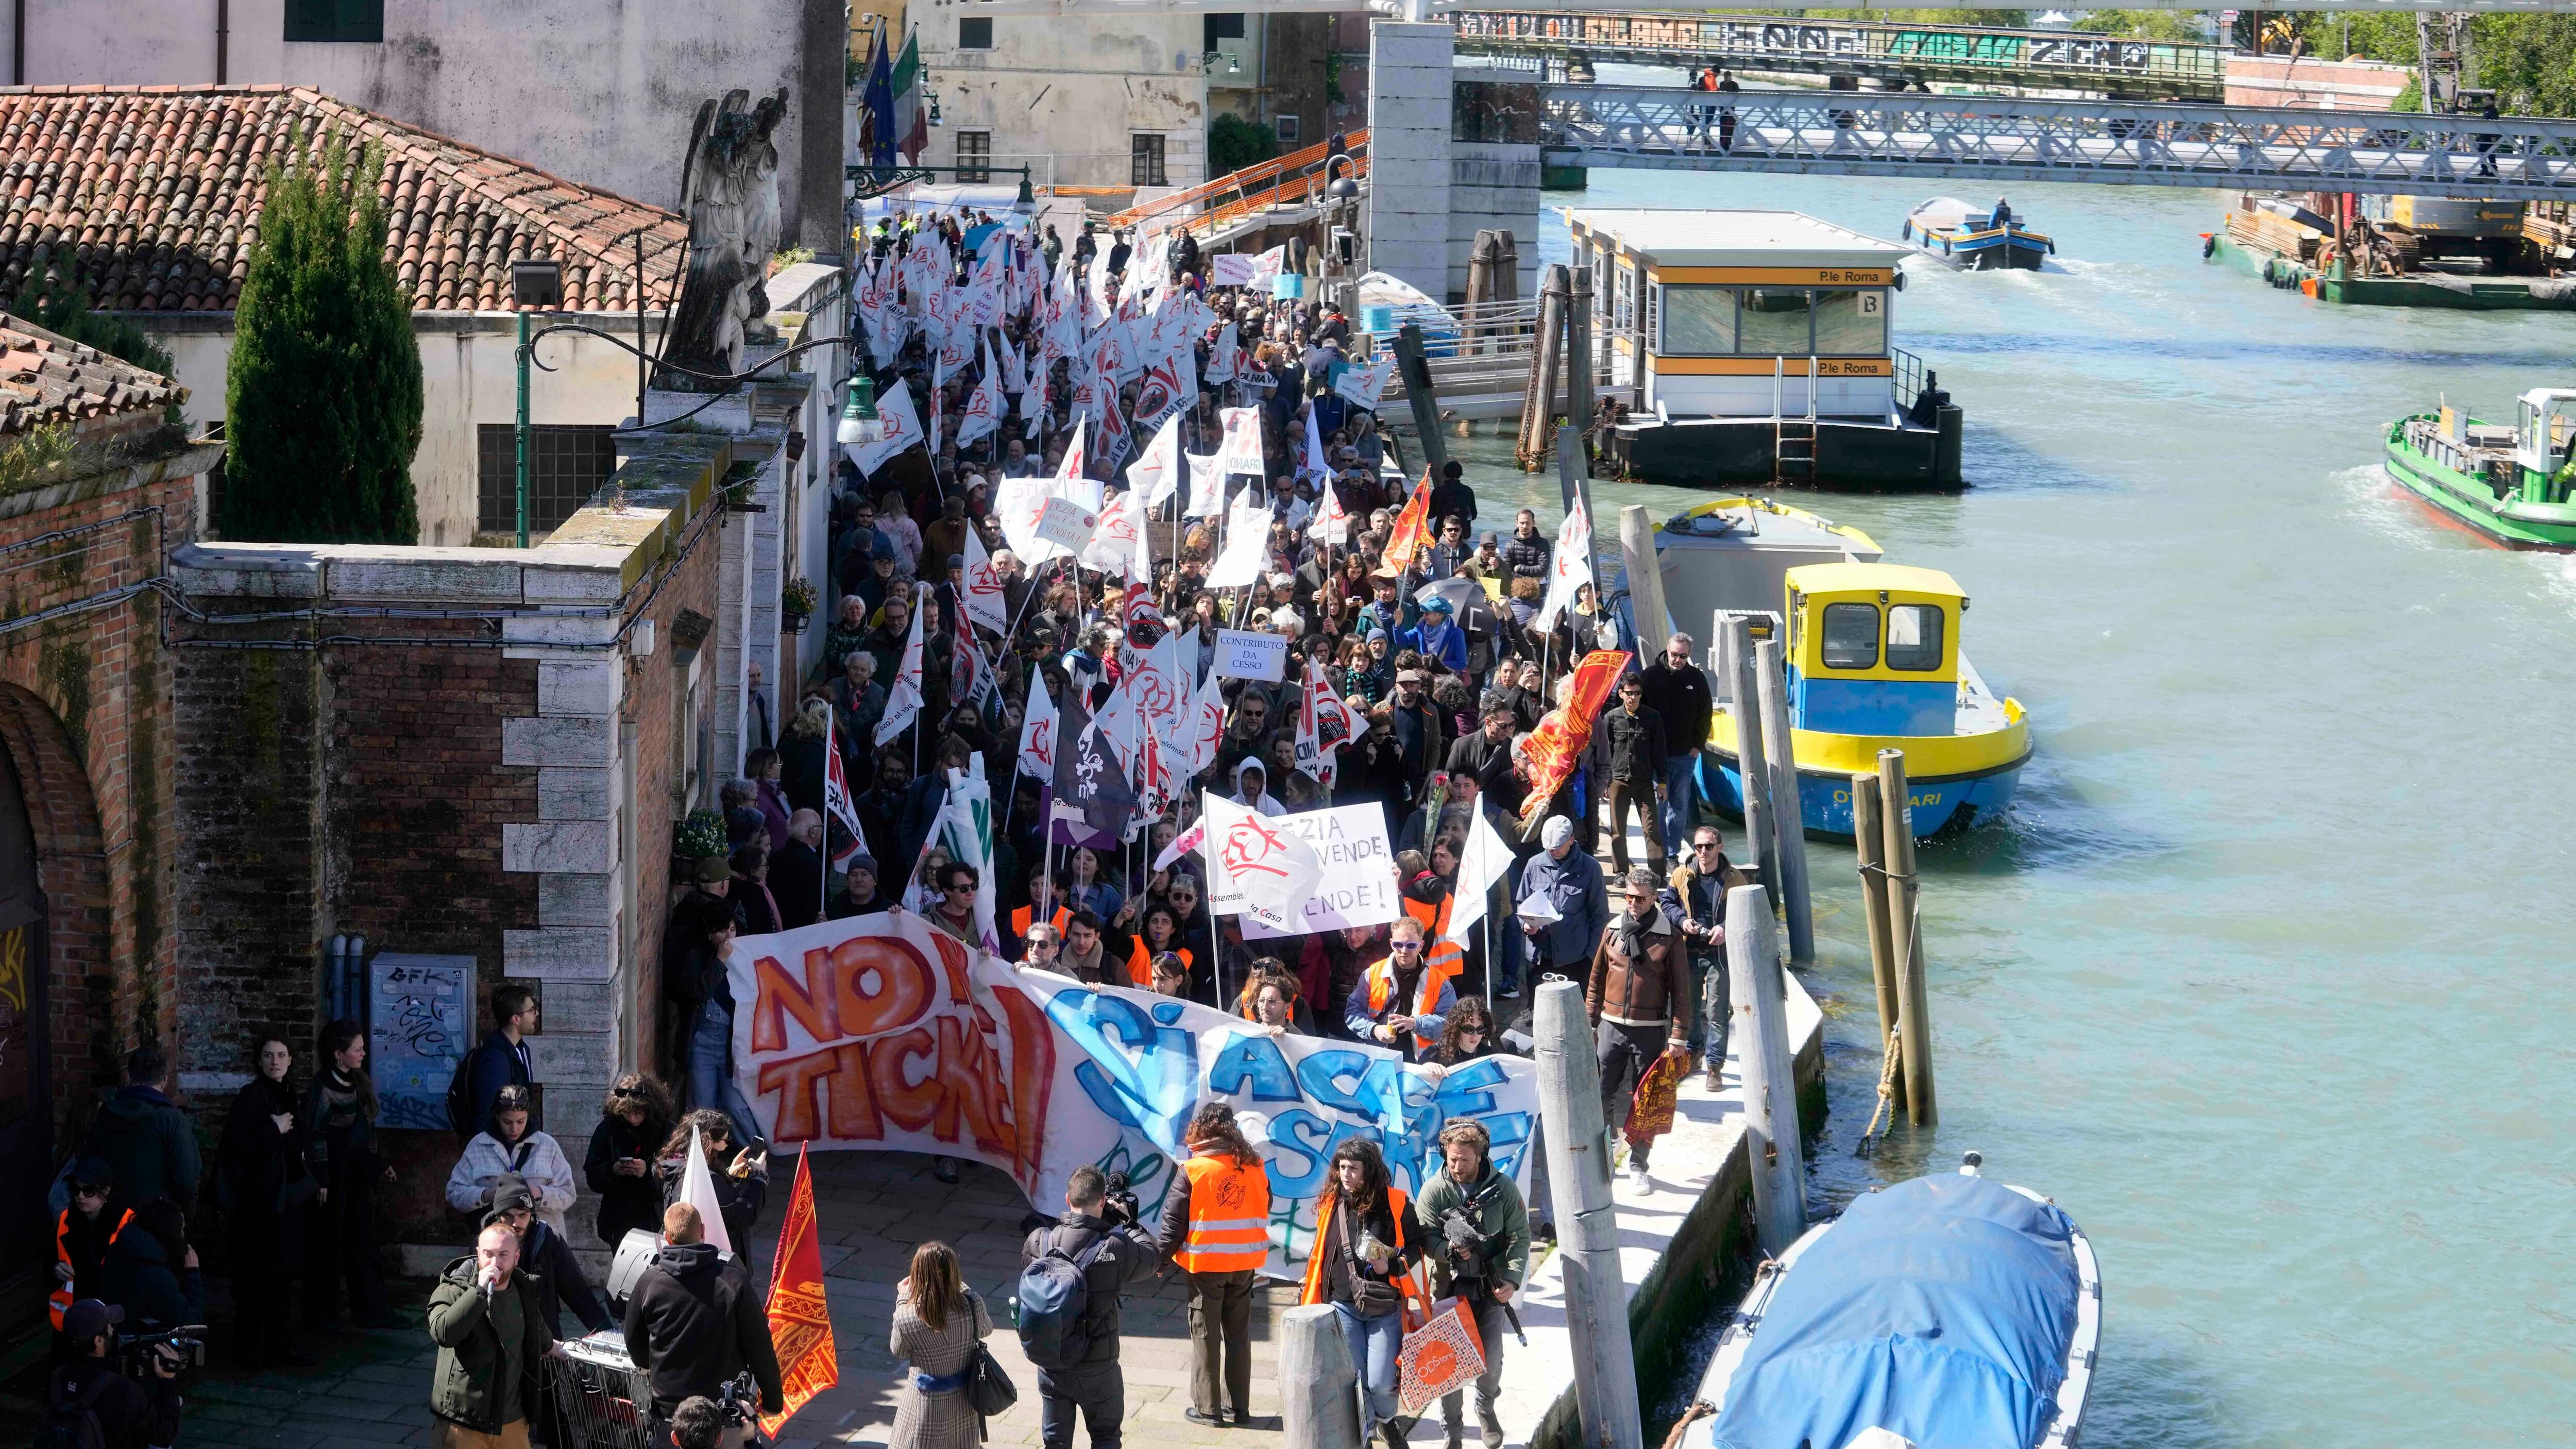 Citizens and activists stage a protest against Venice Tax Fee in Venice on Thursday.